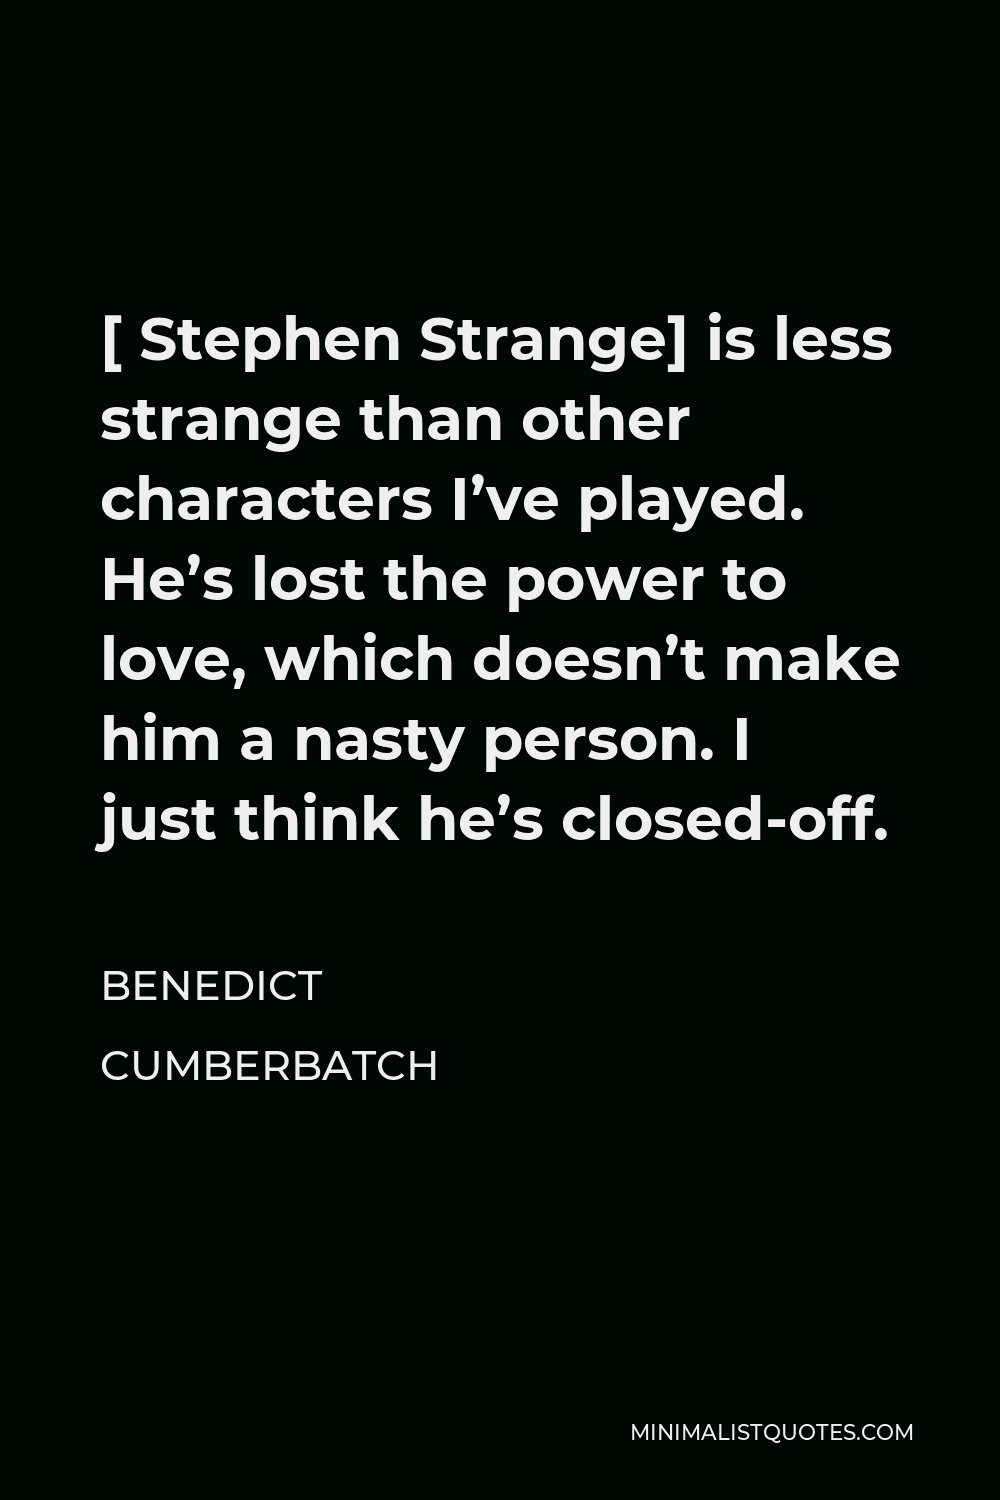 Benedict Cumberbatch Quote - [ Stephen Strange] is less strange than other characters I’ve played. He’s lost the power to love, which doesn’t make him a nasty person. I just think he’s closed-off.